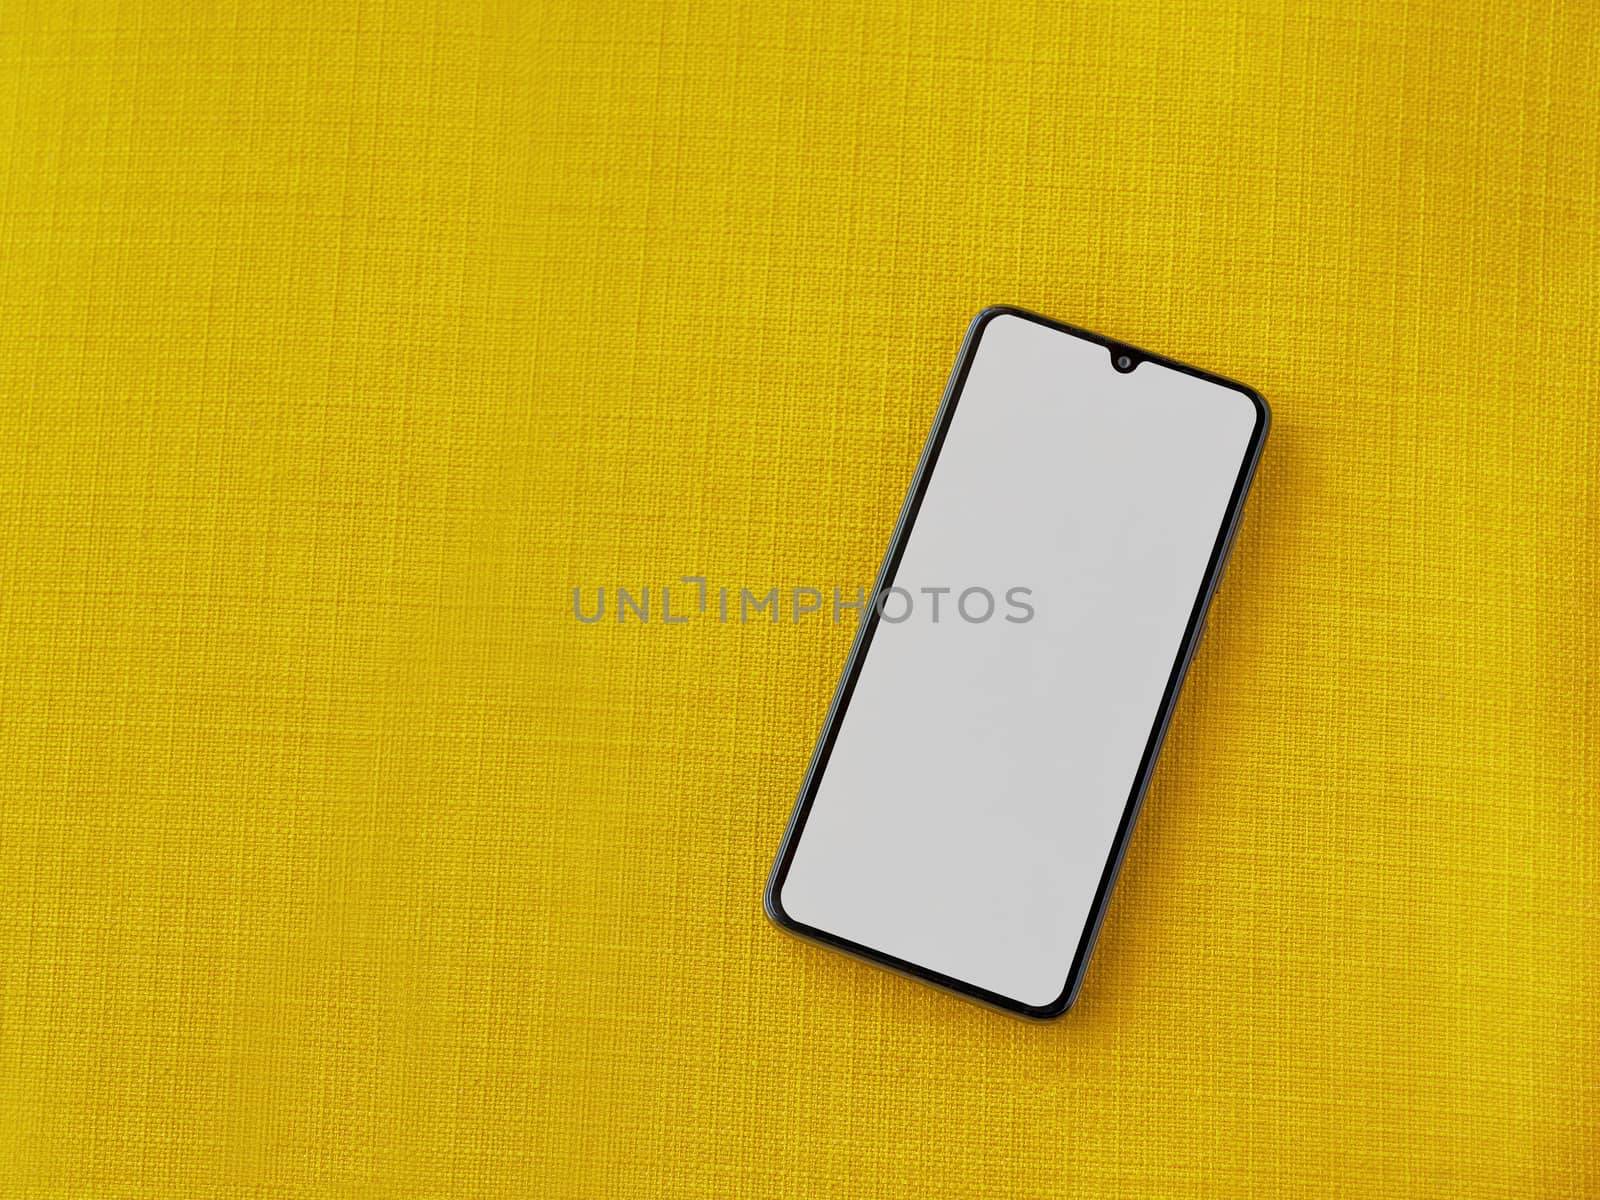 Black mobile smartphone mockup lies on the surface with a blank screen isolated on a yellow fabric background by wavemovies